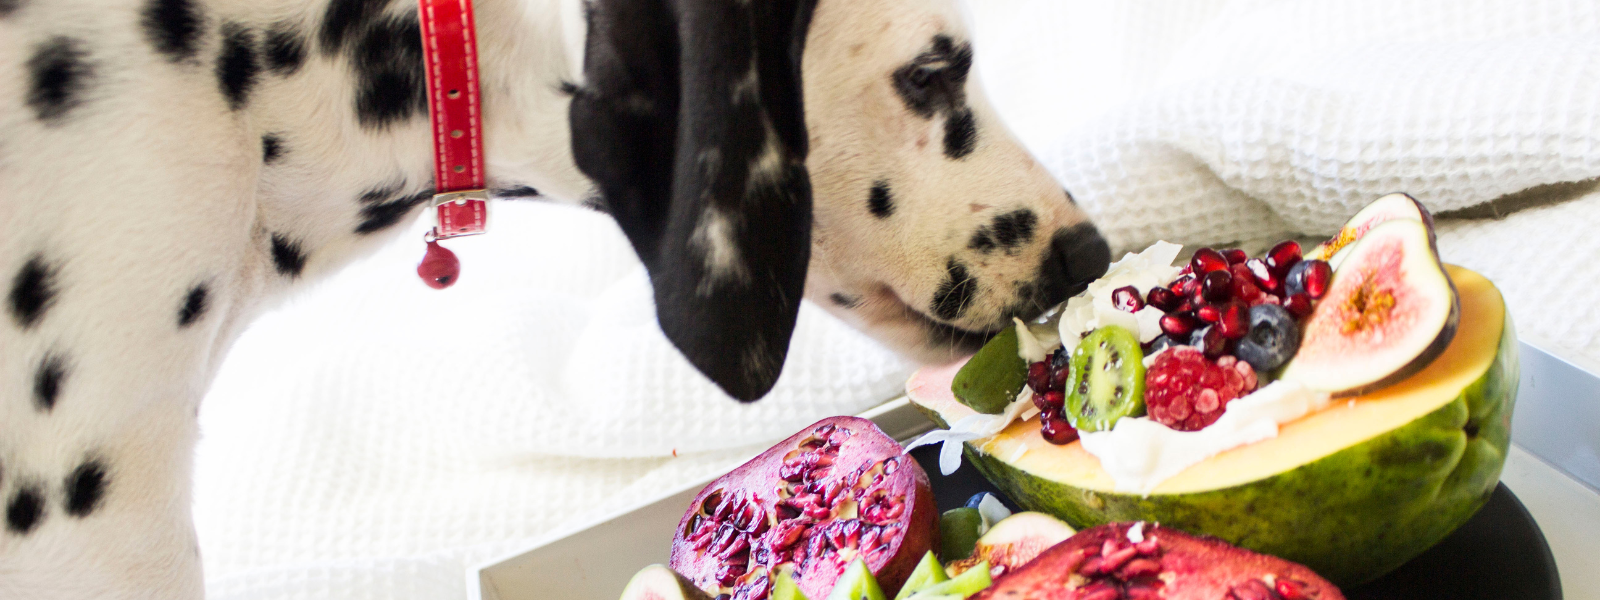 Elimination diet for dogs with food allergy